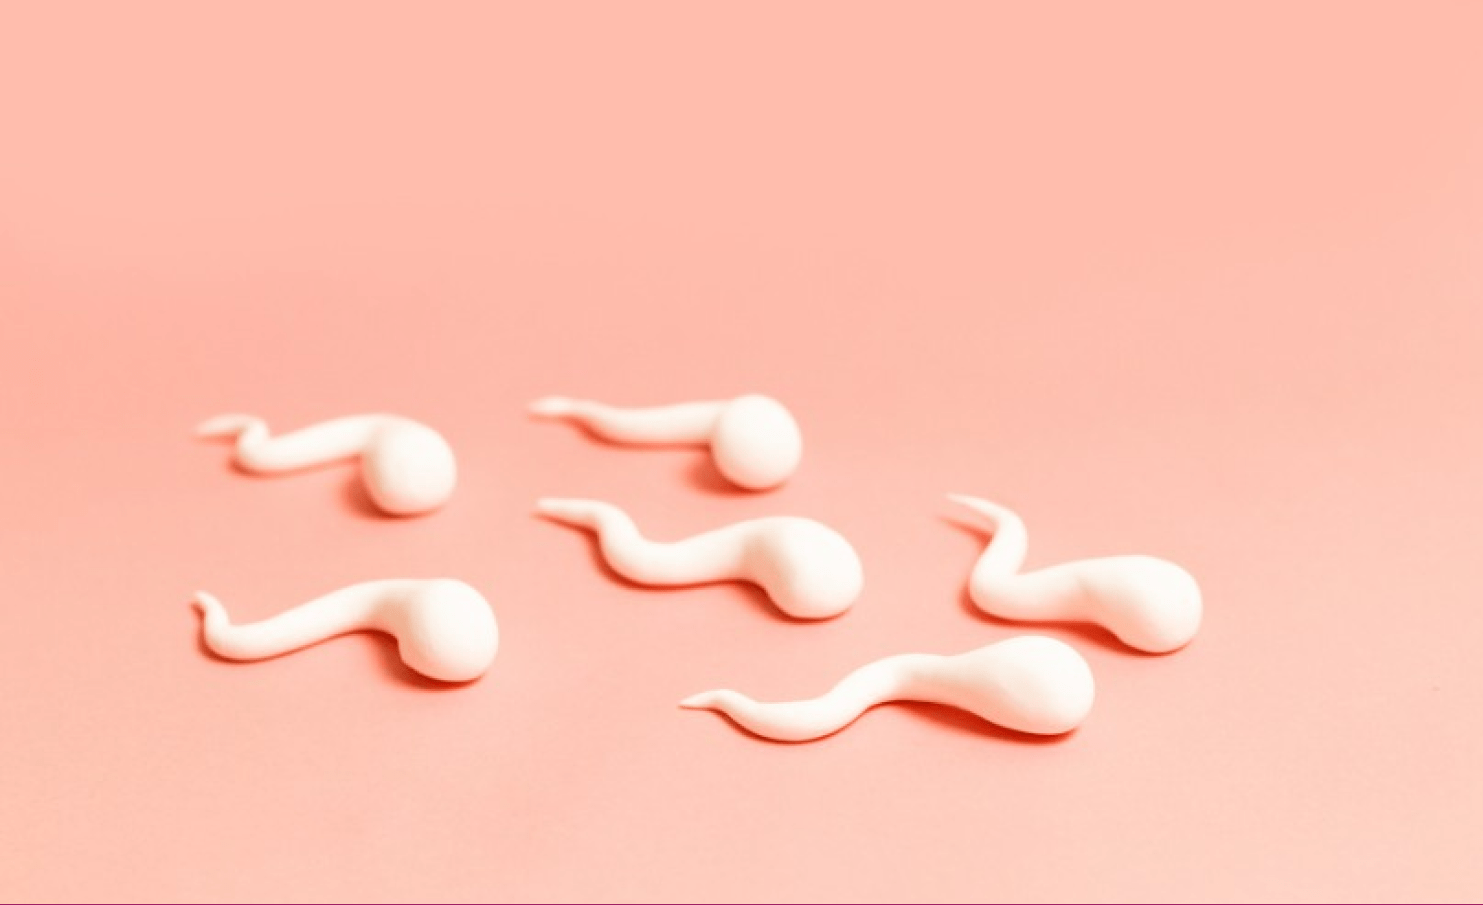 Artistic display of white sculpted figures resembling spermatozoa on a coral pink background.